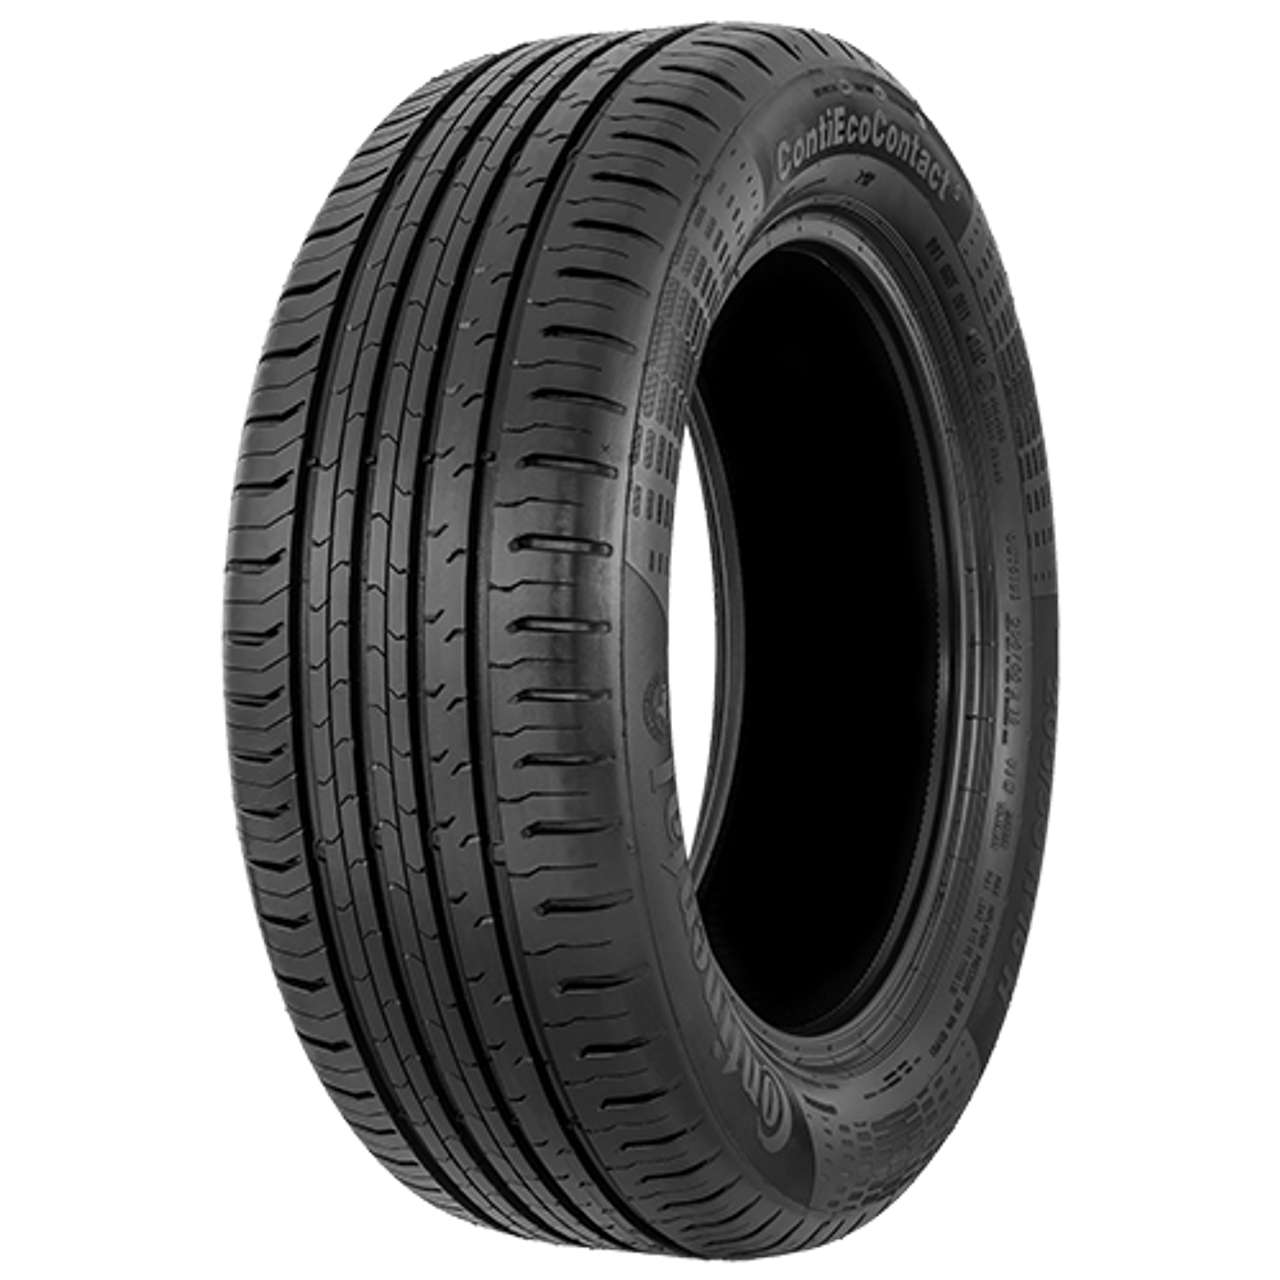 CONTINENTAL CONTIECOCONTACT 5 (TOY) 165/65R14 83T